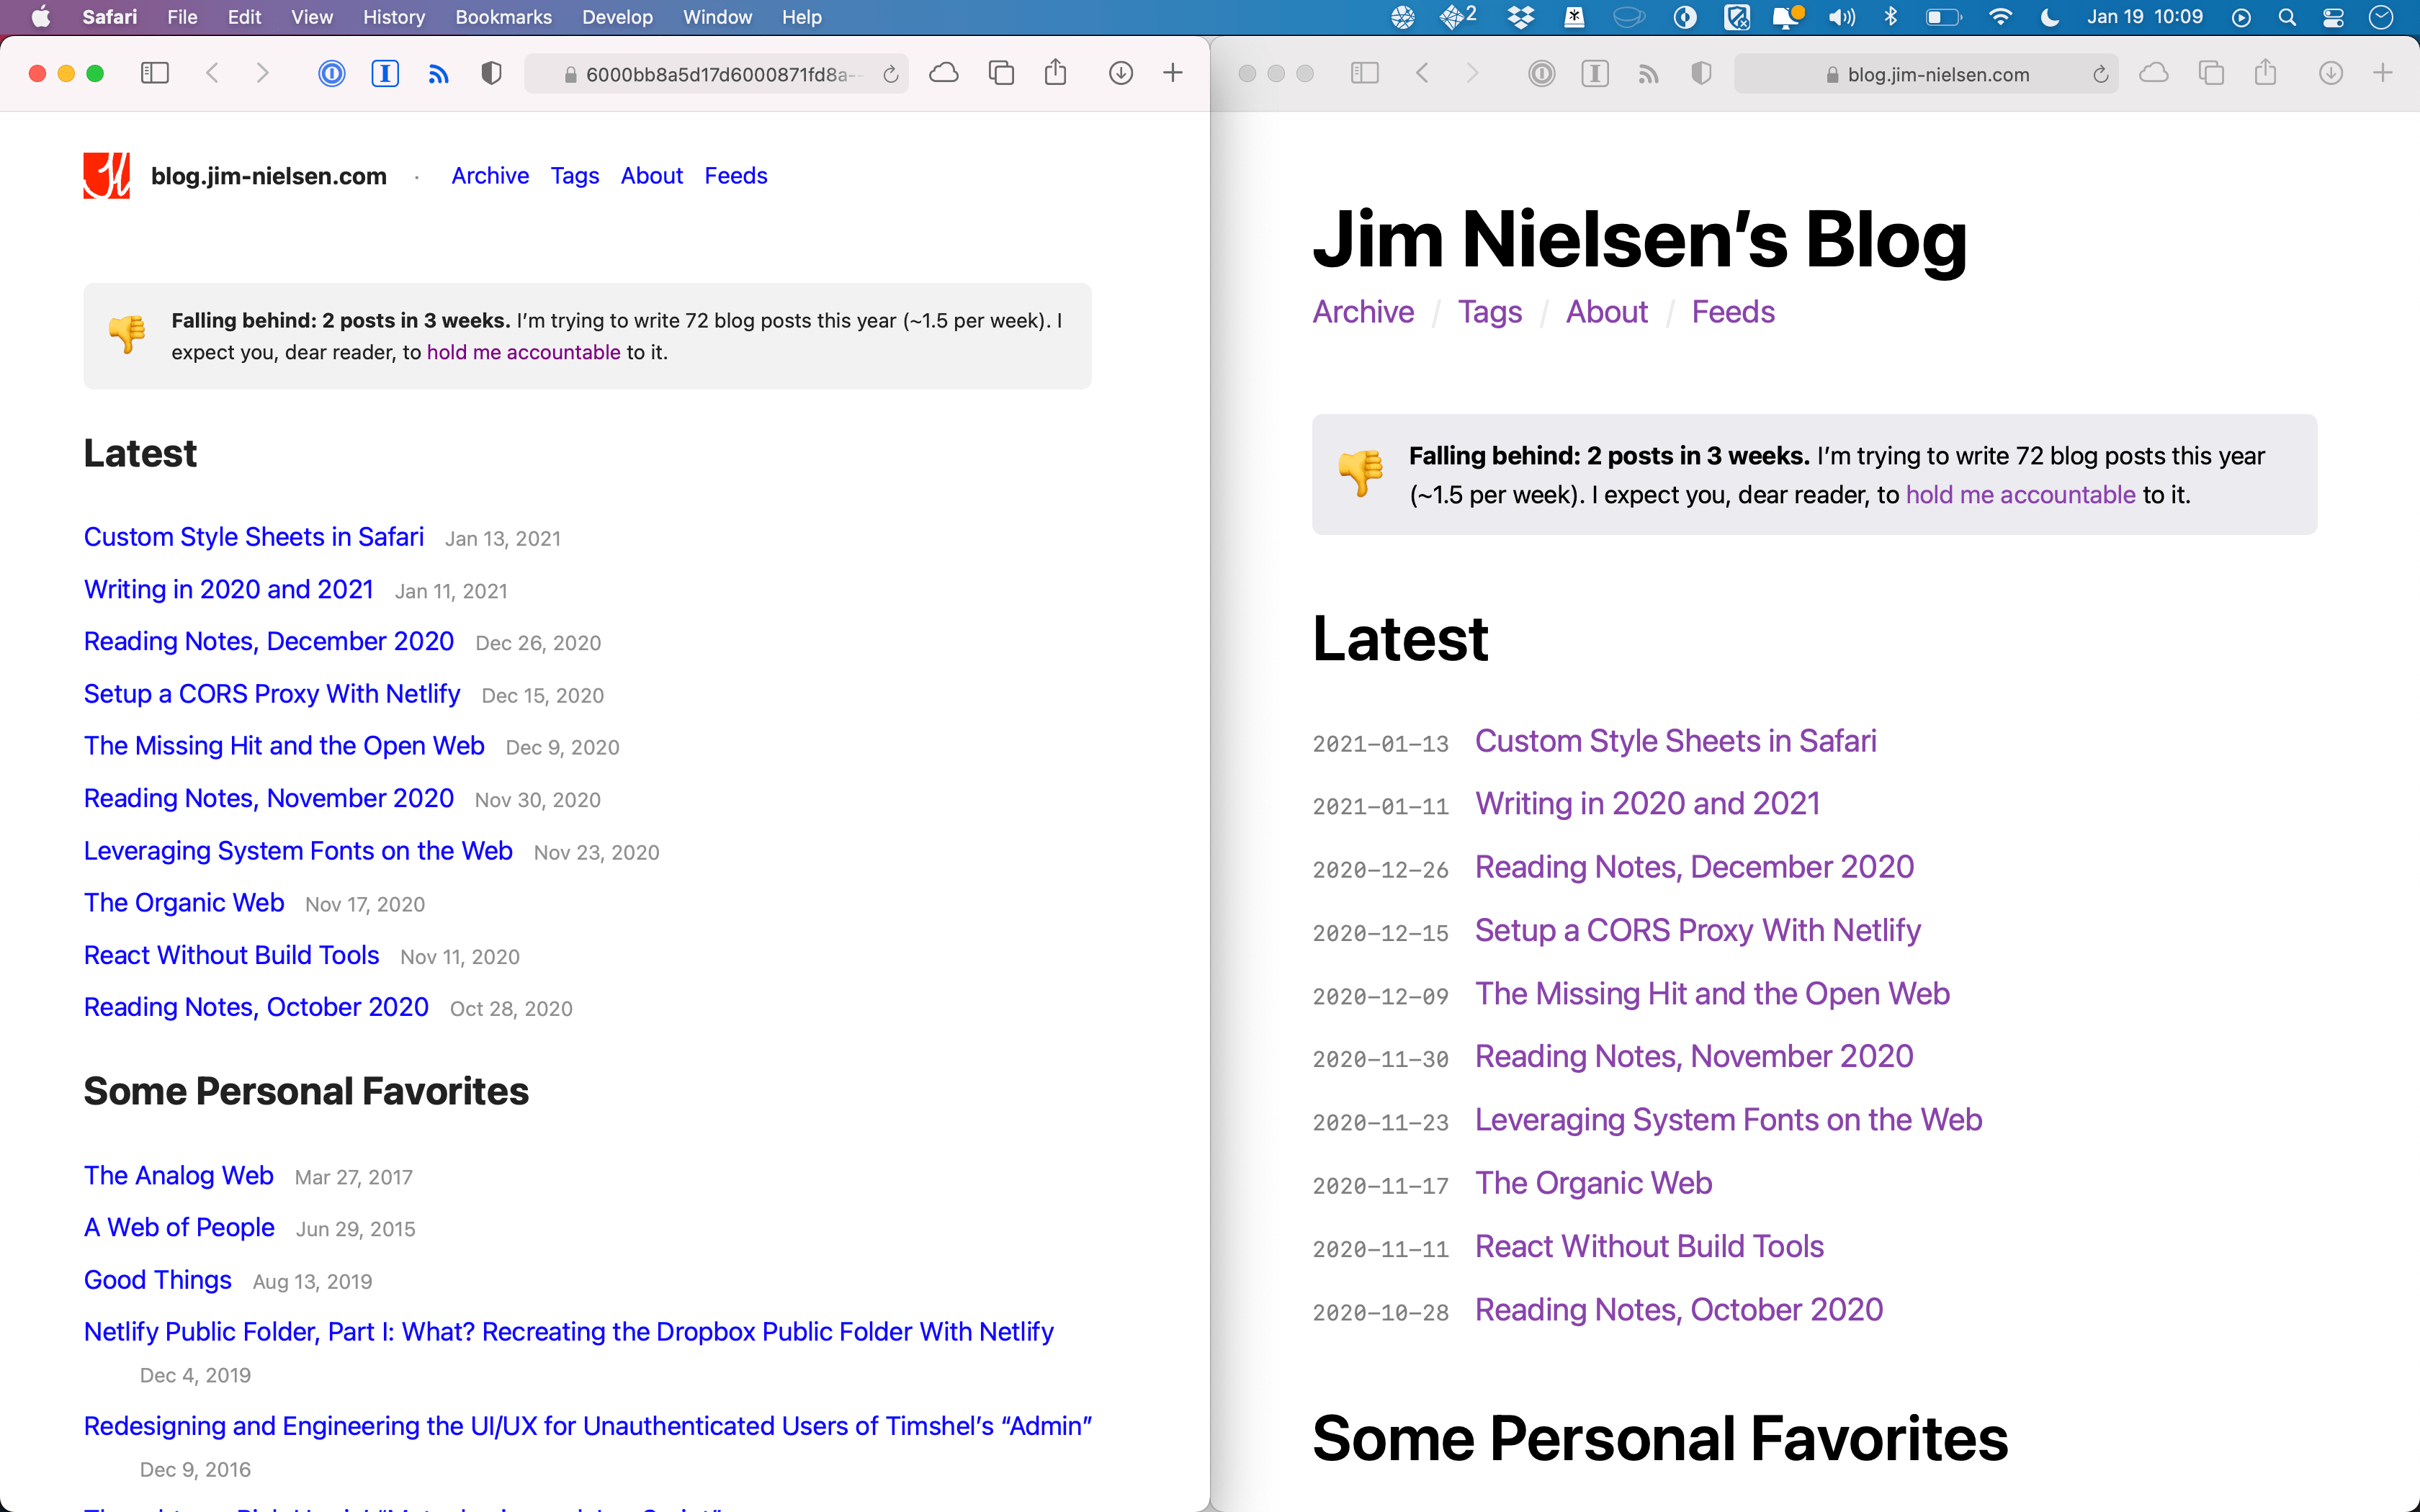 Side-by-side screenshots of blog.jim-nielsen.com, showing how the date formats changed position between the old and new designs.